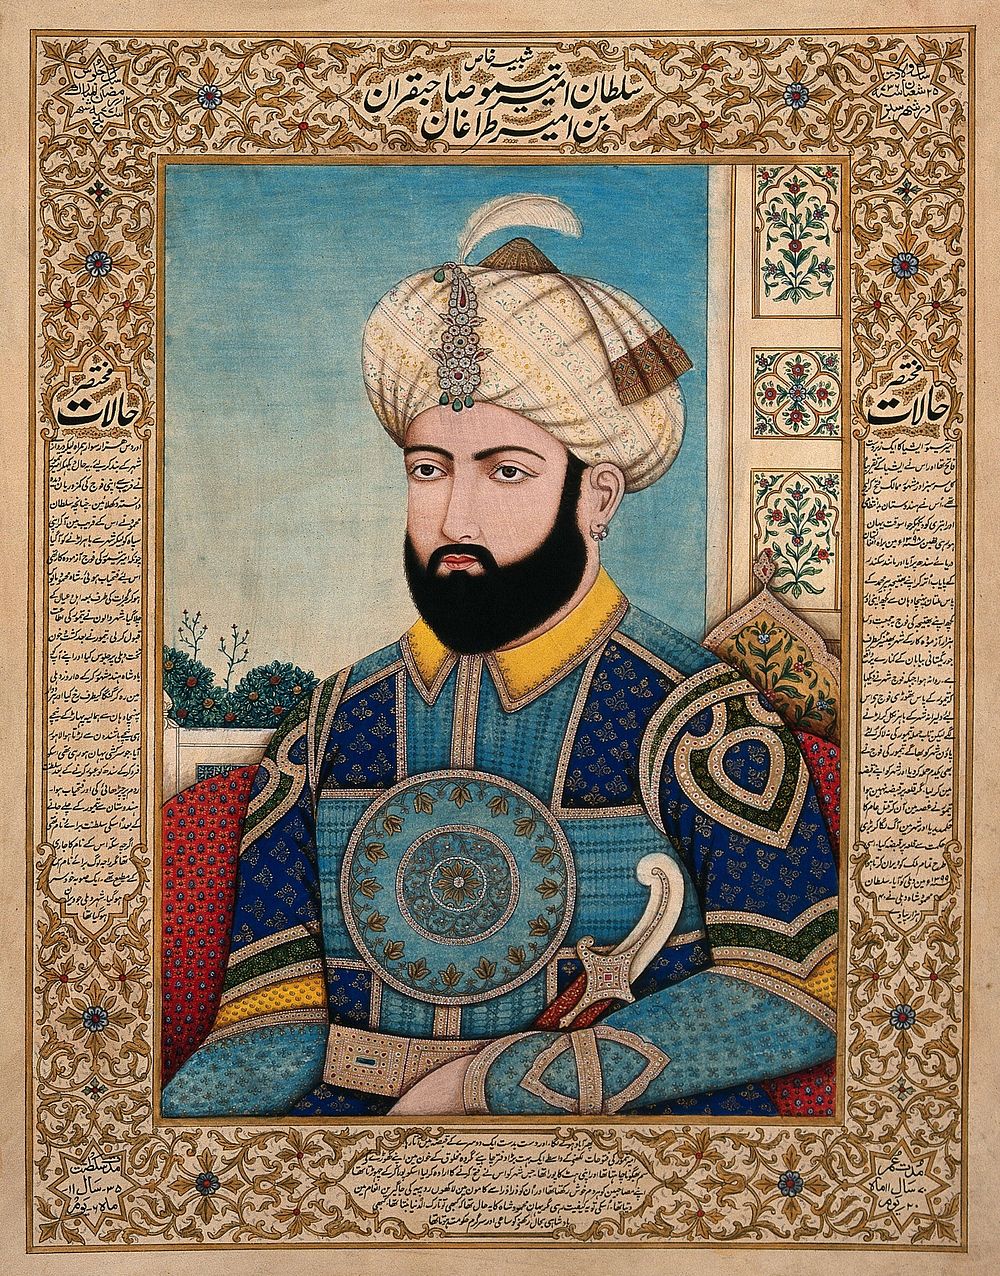 A Sikh commander . Gouache painting by an Indian painter.